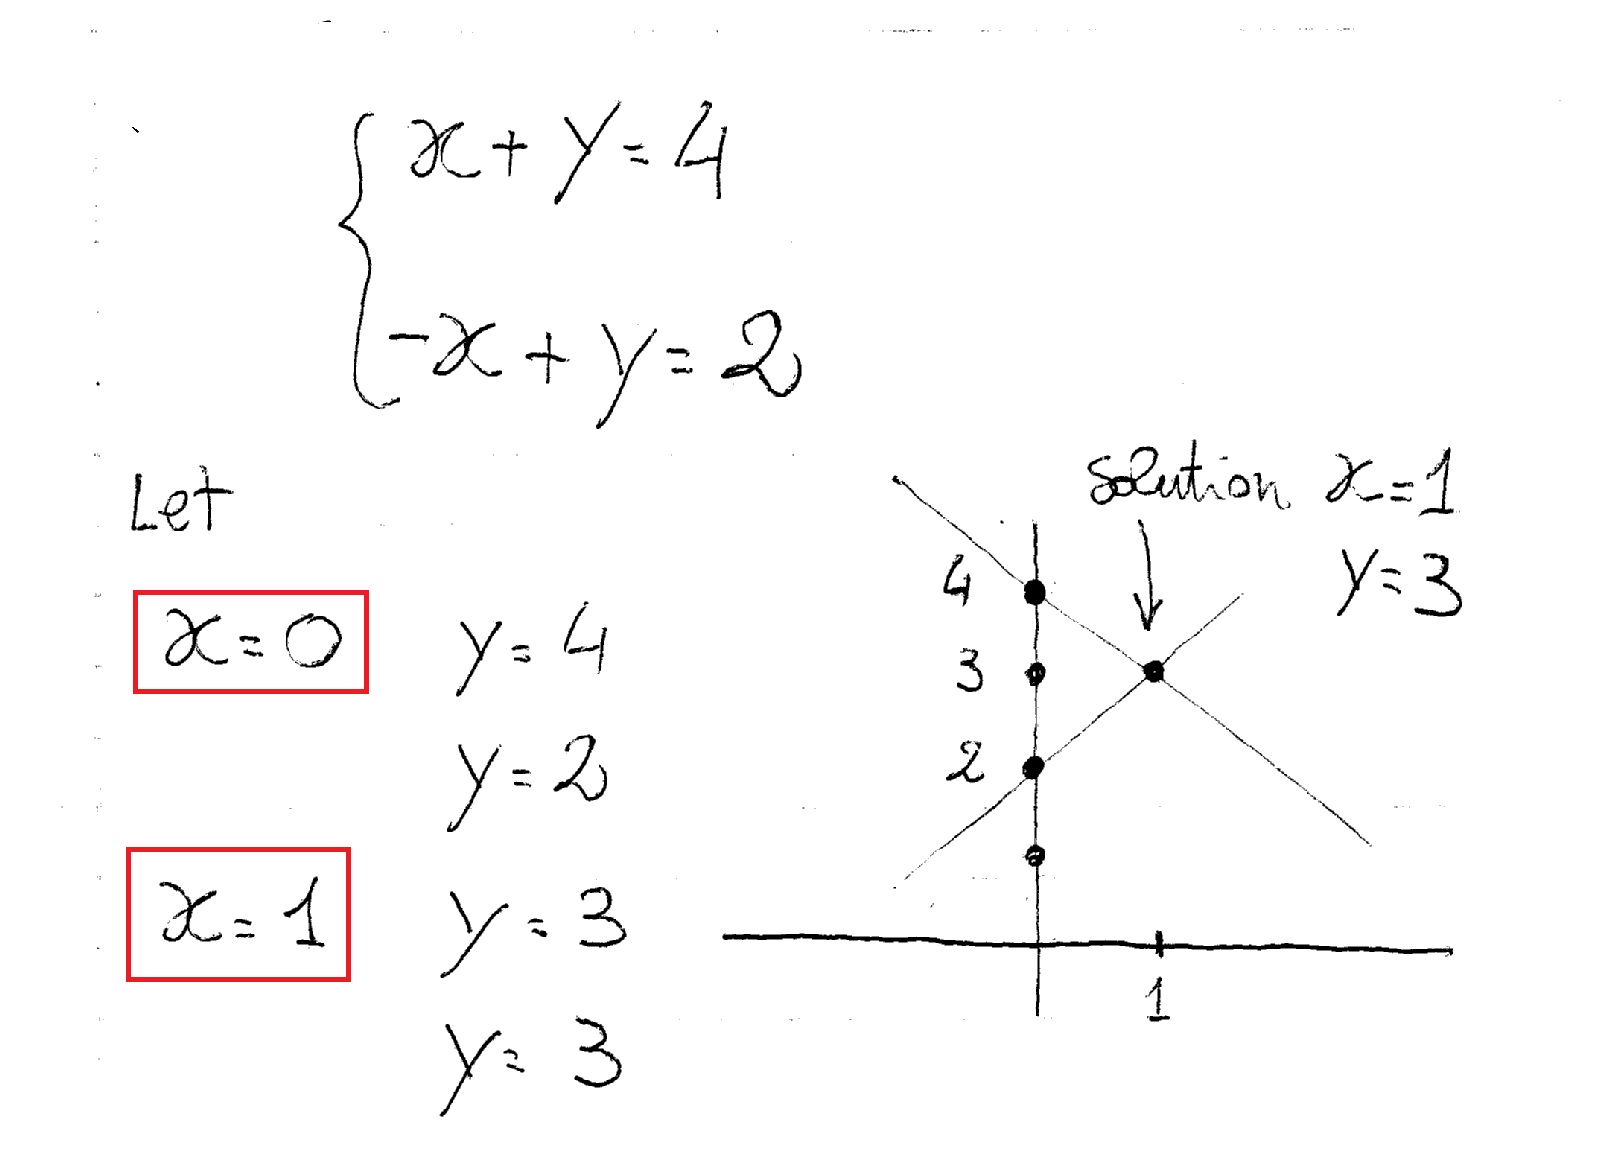 How Do You Solve The System By Graphing Given X Y 4 And X Y 2 Thanks In Advance For Any Help At All On This One Socratic